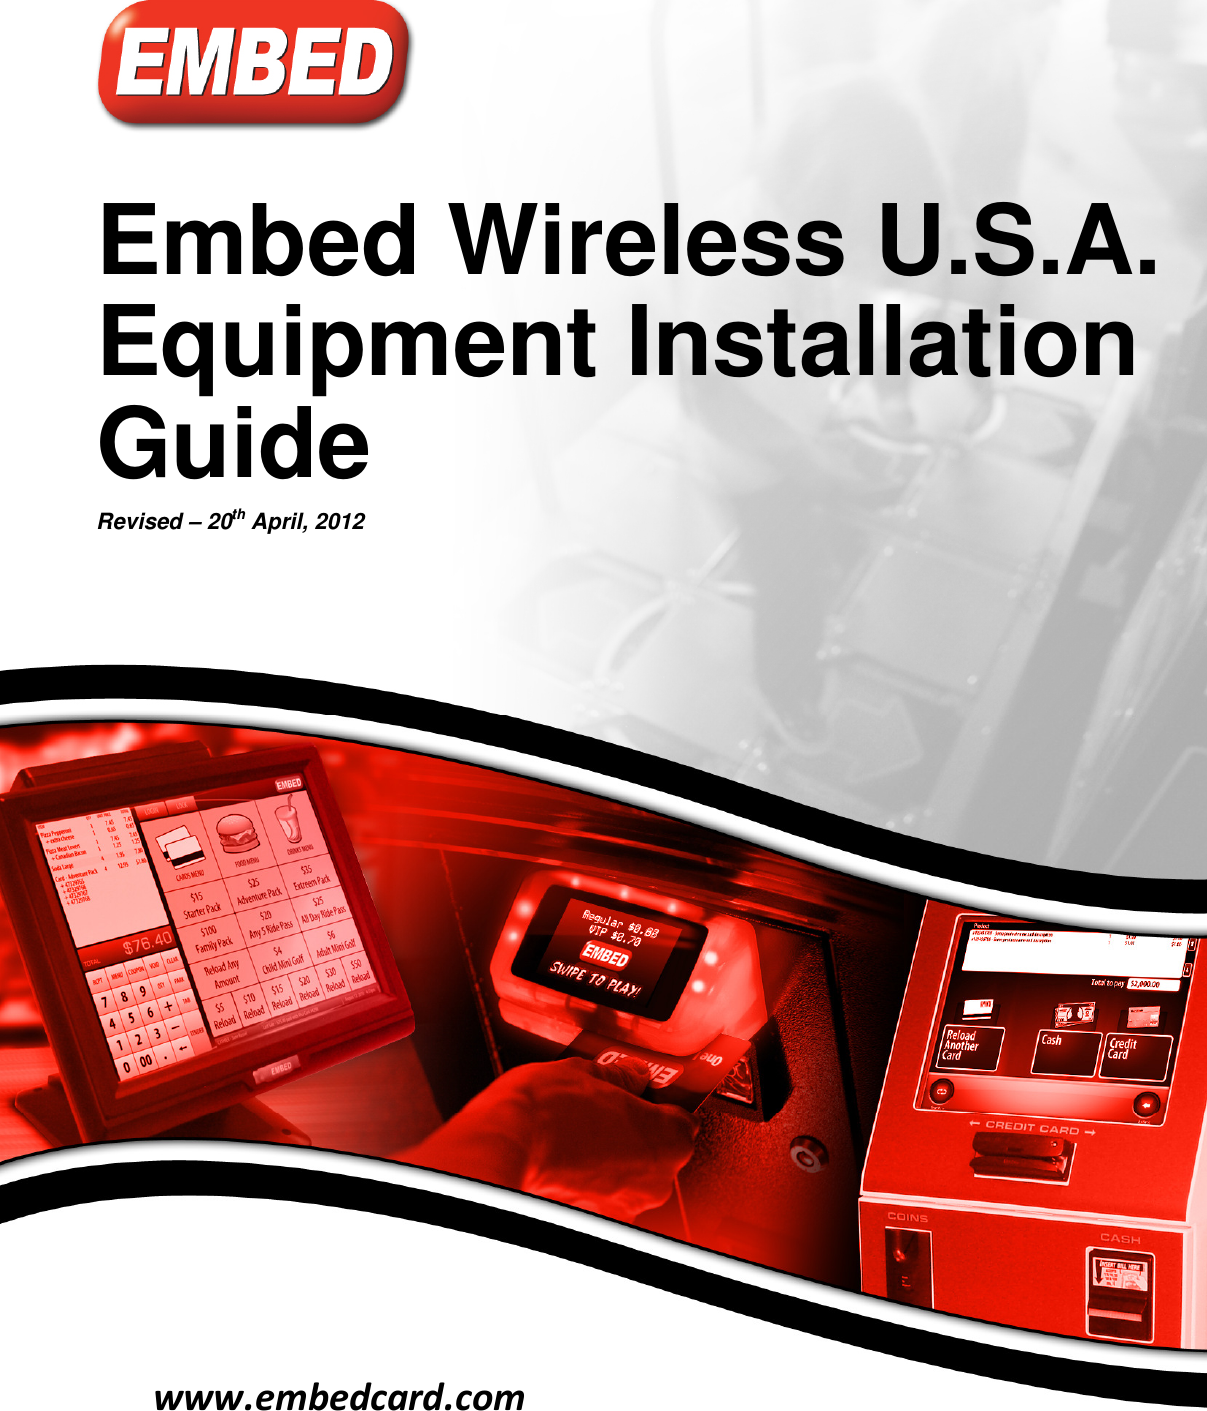     Embed Wireless U.S.A. Equipment Installation Guide Revised – 20th April, 2012 www.embedcard.com  